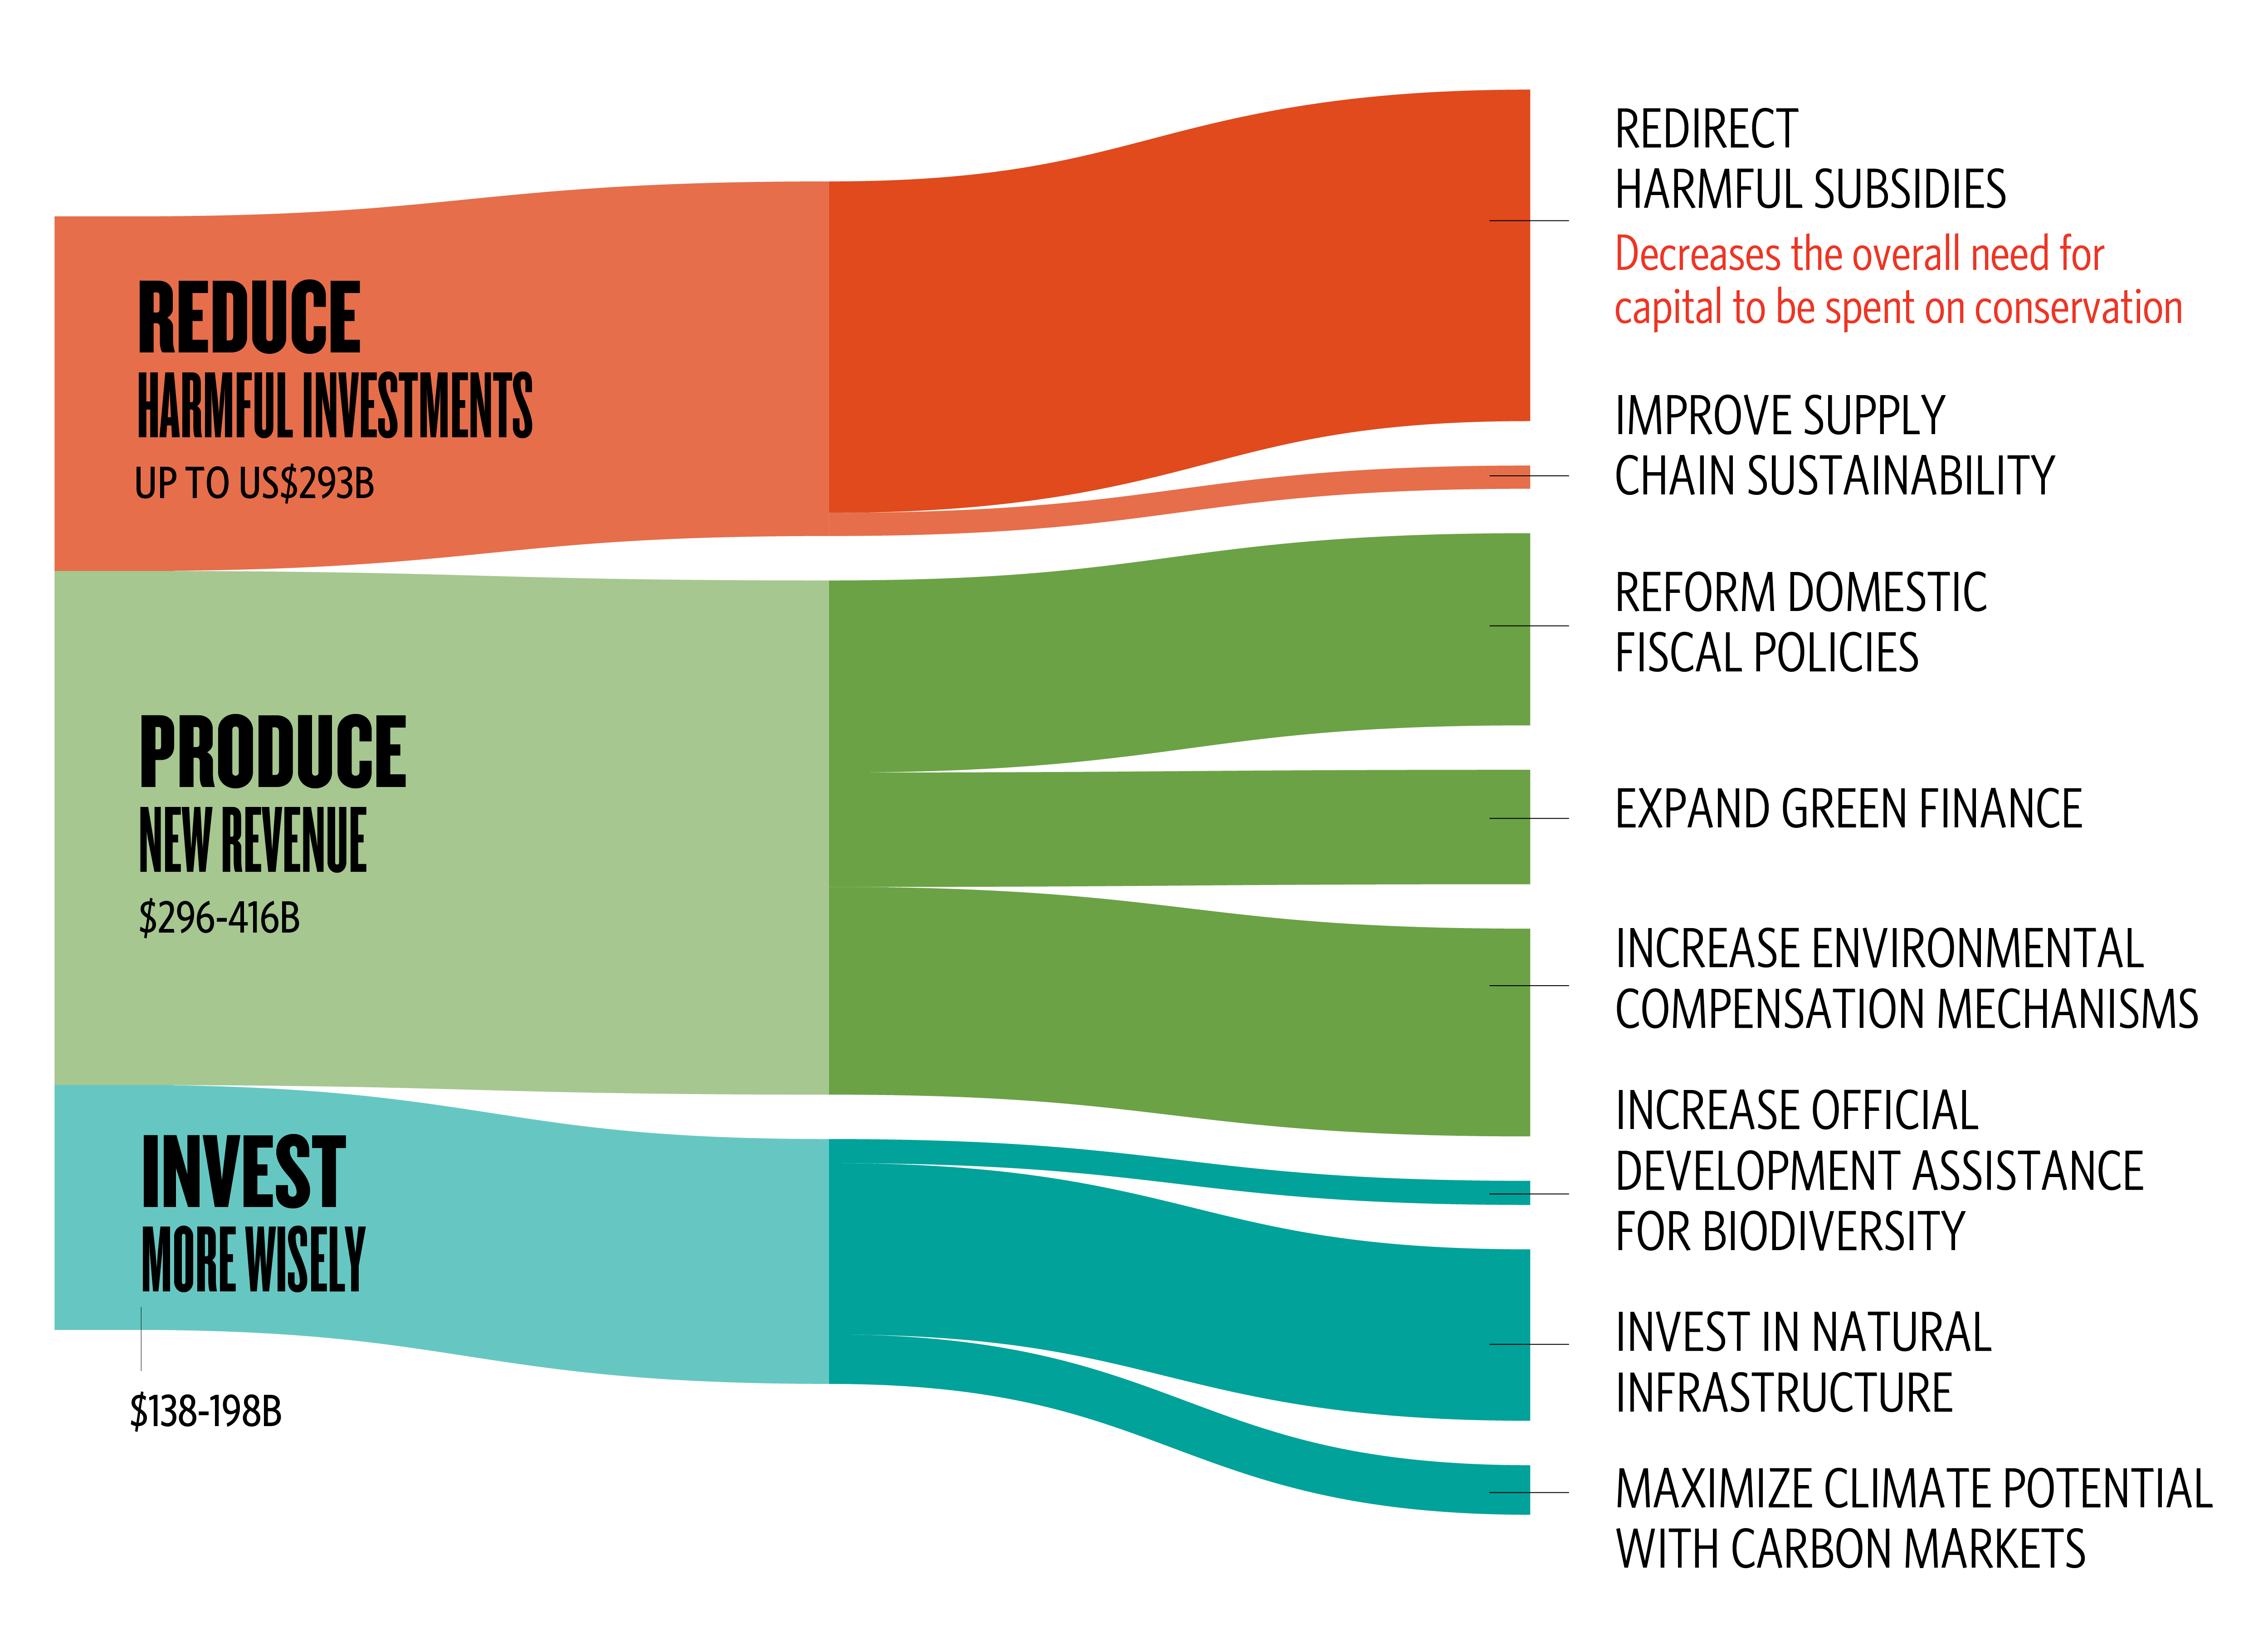 a sankey diagram showing three groupings (Reduce Harmful Investments, Produce New Revenue, Invest More Wisely) flowing into eight financial mechanisms